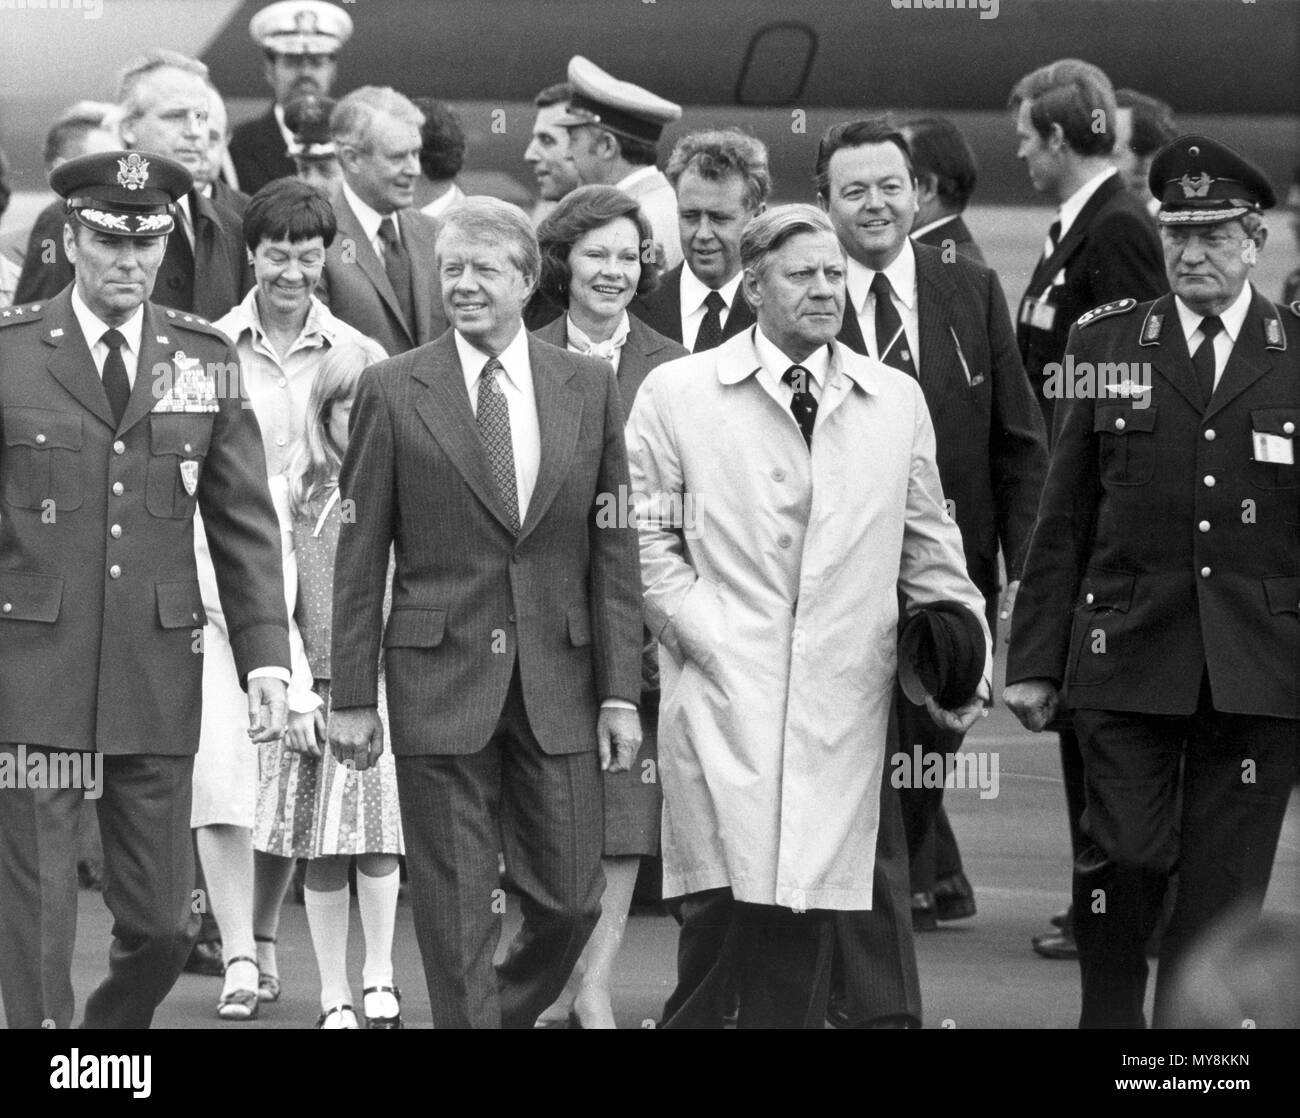 After a greeting at Rhein Main Airport in Frankfurt am Main on 15 July 1978 (front l-r): US General William John Evans, commander of Allied Air Forces Central Europe; US President Jimmy Carter; German Chancellor Helmut Schmidt; and Generalleutnant (Lieutenant General) Gerhard Limberg. In the second row (l-r): Chancellor Schmidt's wife Hannelore (Loki) Schmidt, and behind her, US Secretary of State Cyrus Vance, President Carter's daughter Amy Carter, and his wife Rosalynn Carter, German Defence Minister Hans Apel, and Premier of Hesse Holger Boerner. On the second day of his state visit to the  Stock Photo